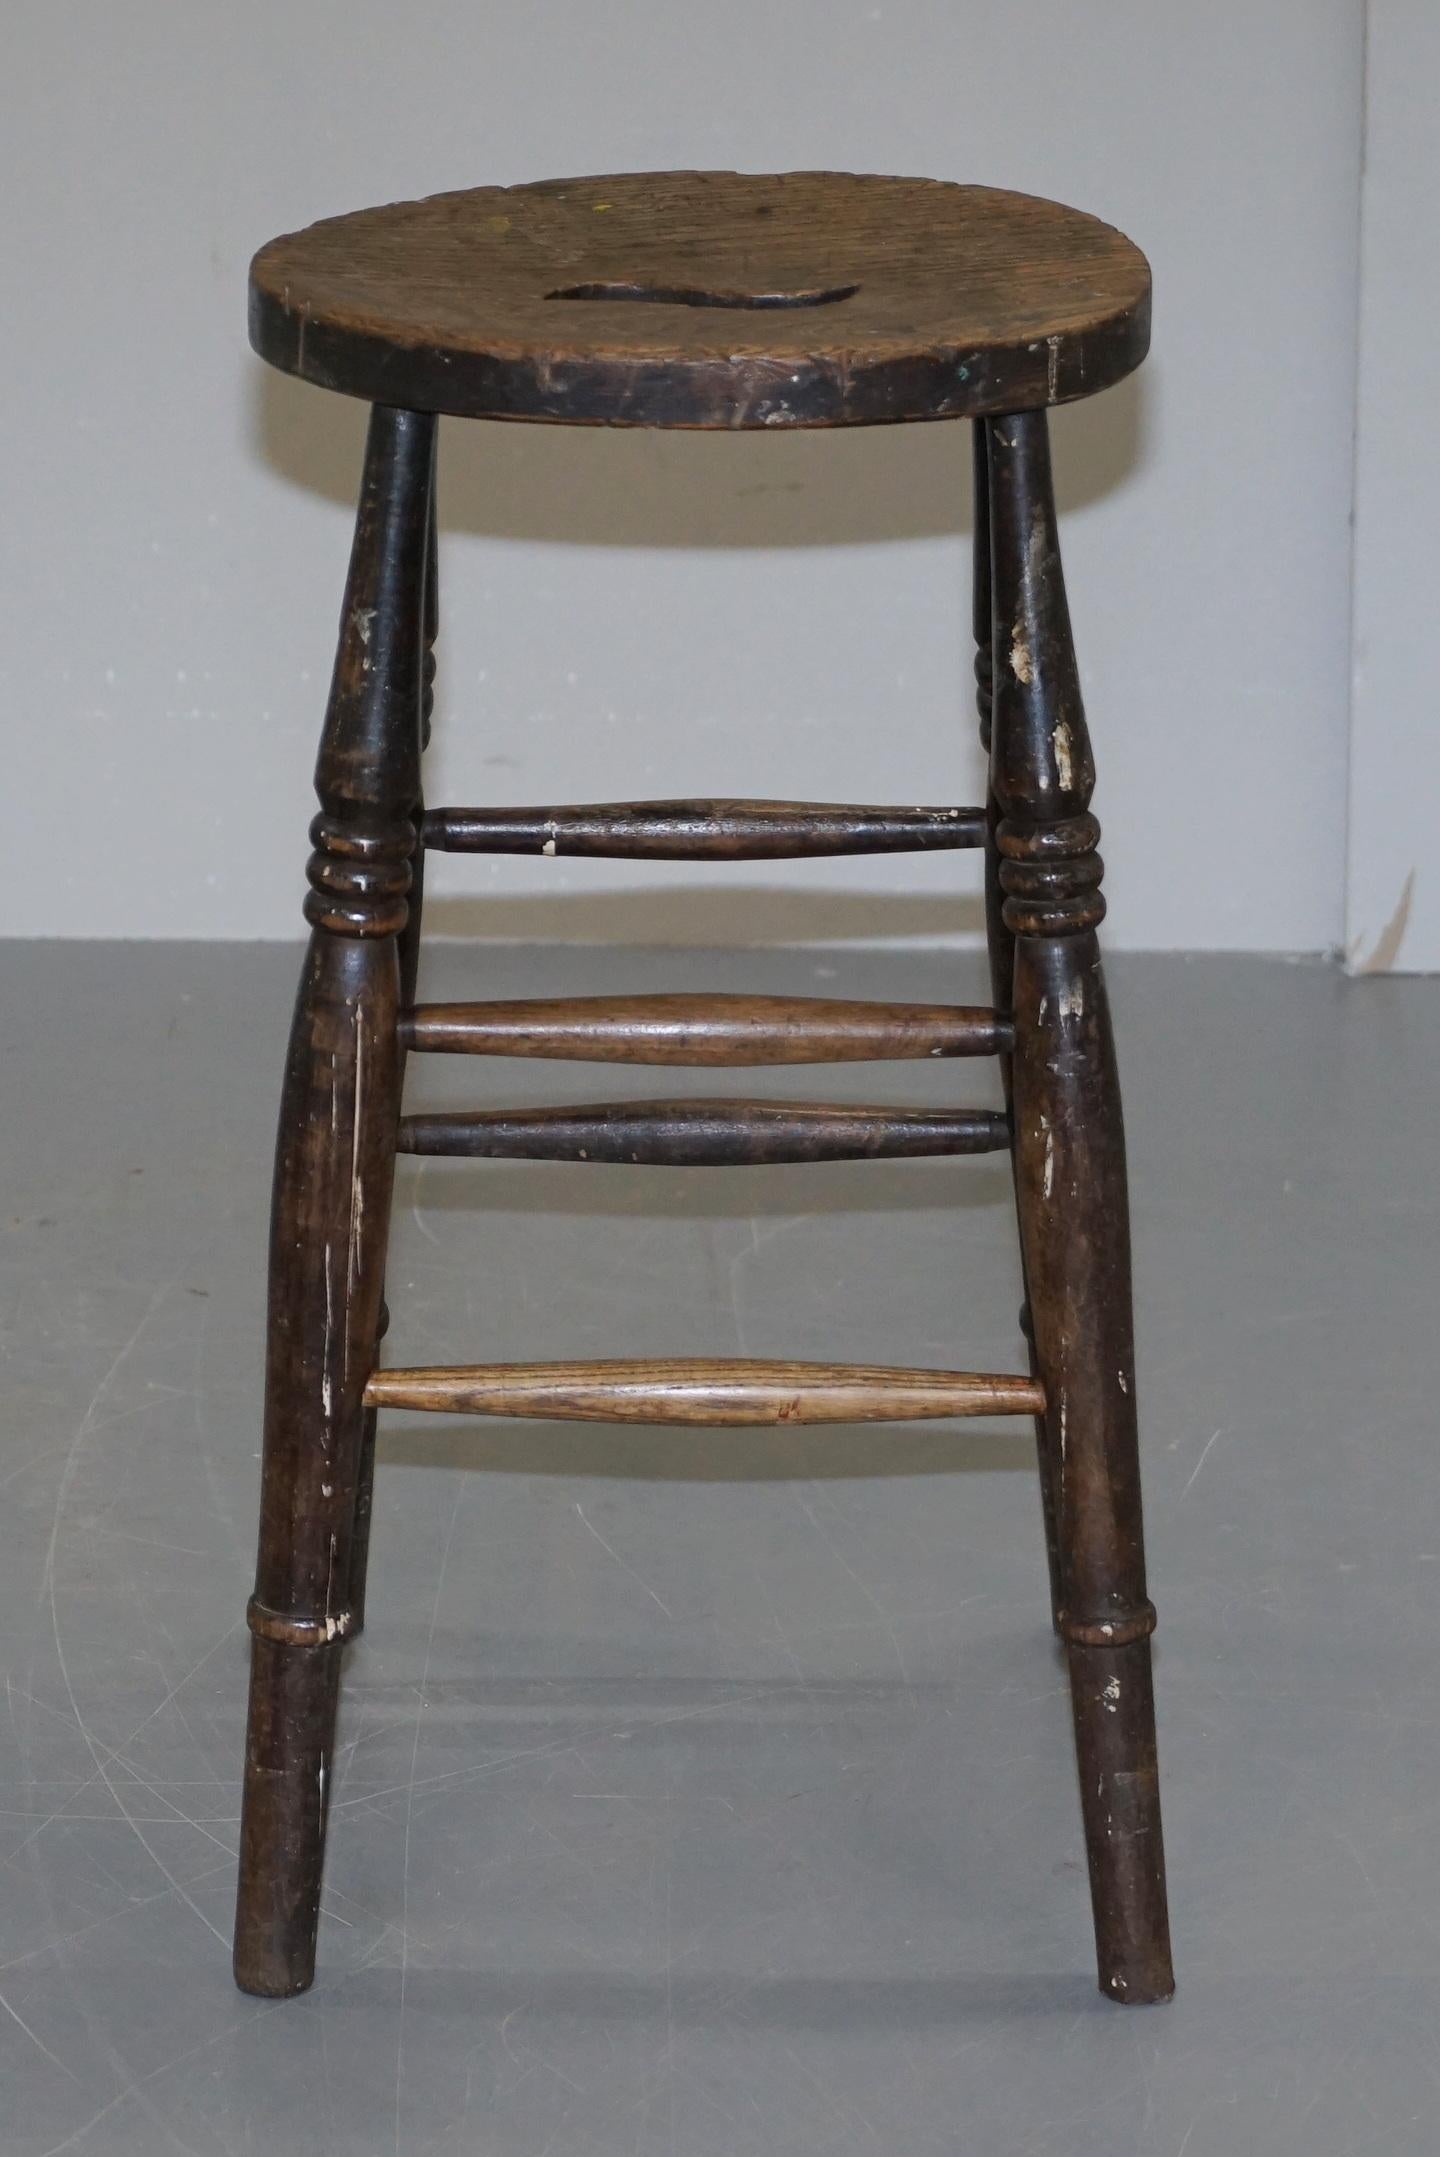 We are delighted to offer for sale this stunning 18th century English oak artist bar stool with handle top

A very good looking period 18th century Dutch stool, it has the rare handle cut out to the top and curved front, I’ve never seen this exact